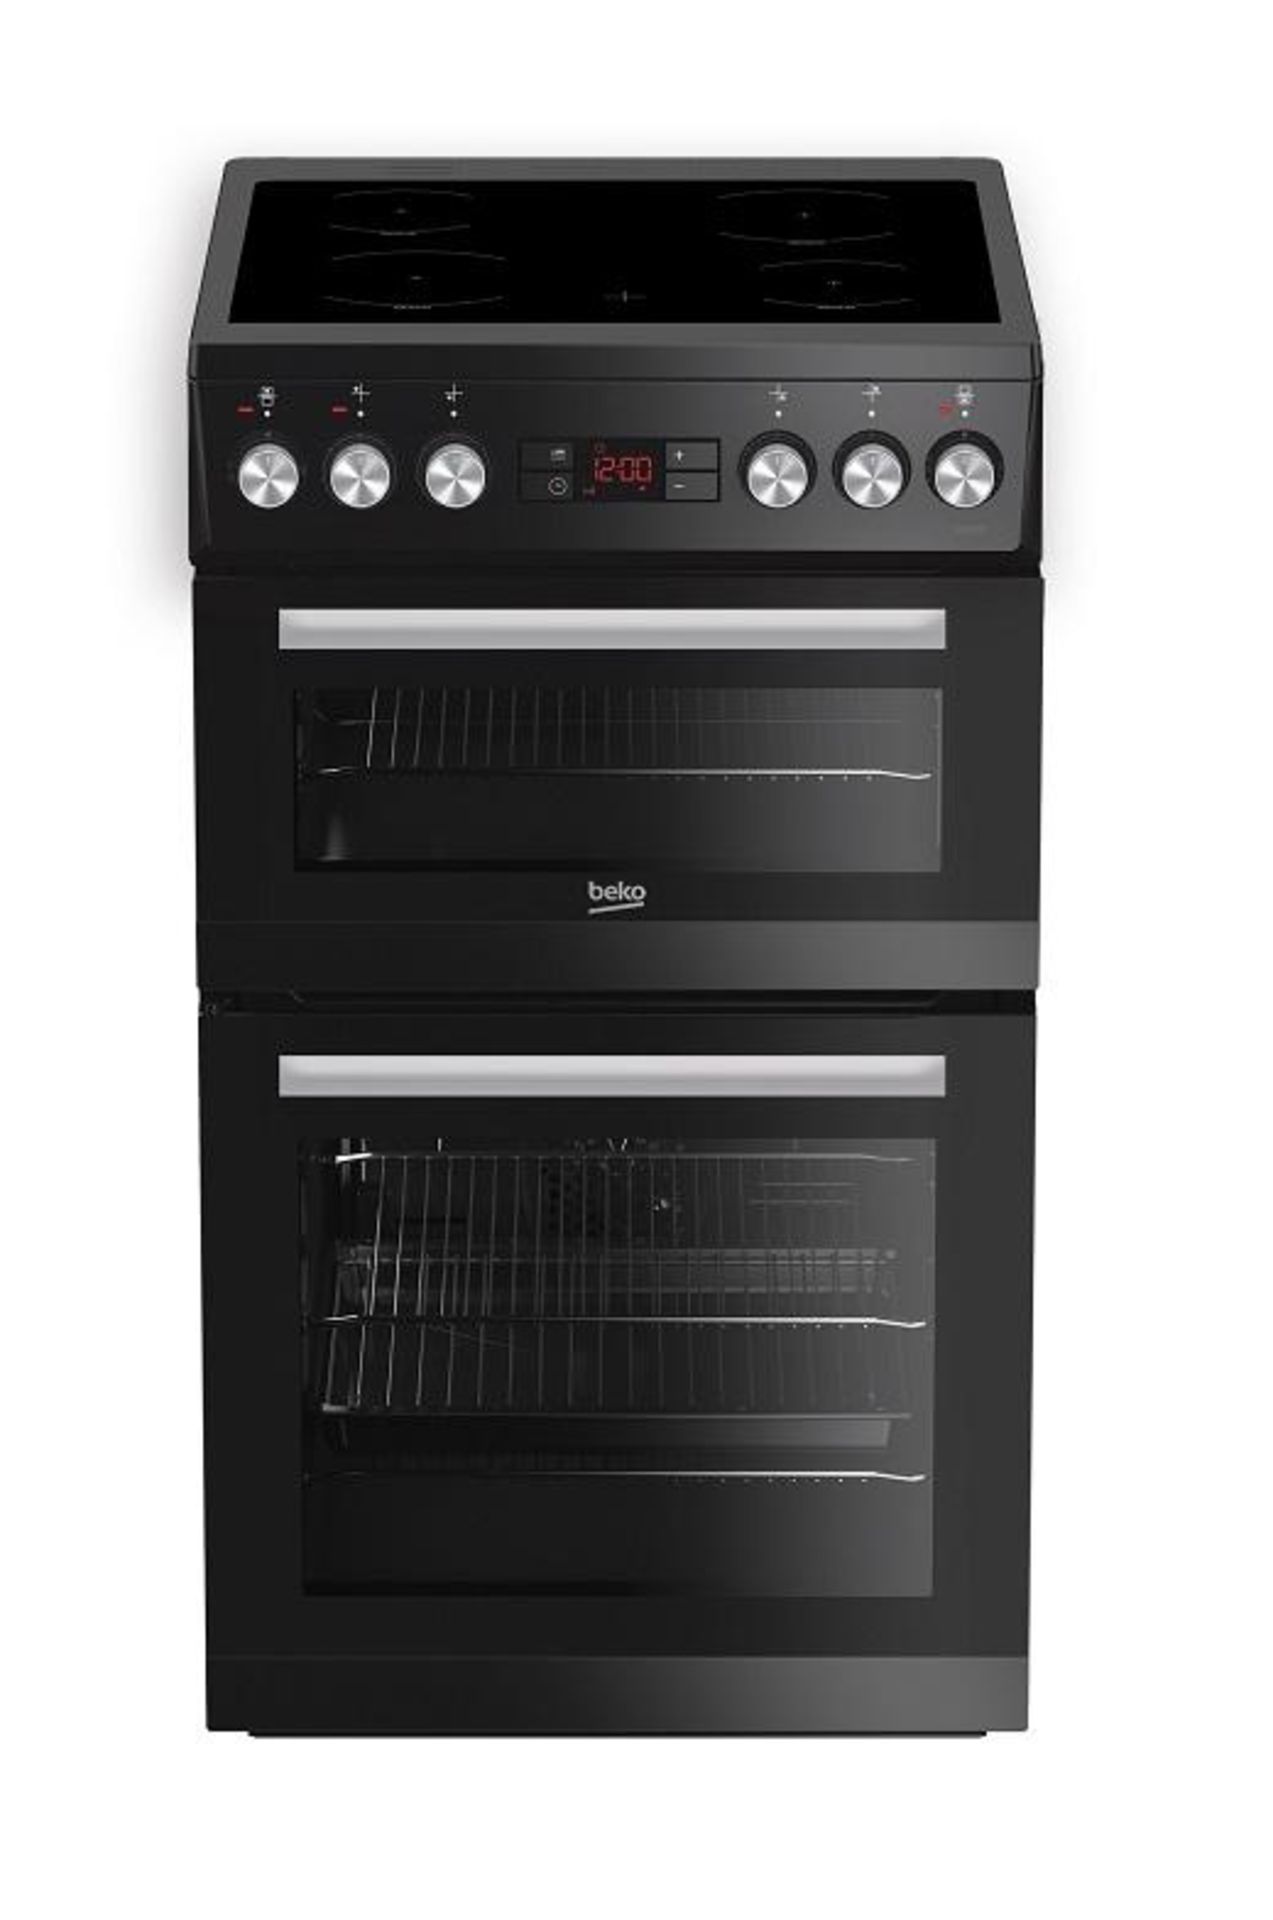 Six boxed unused Beko 50cm Double Oven Electric Cookers, manufacturers model number CHDO50CK,